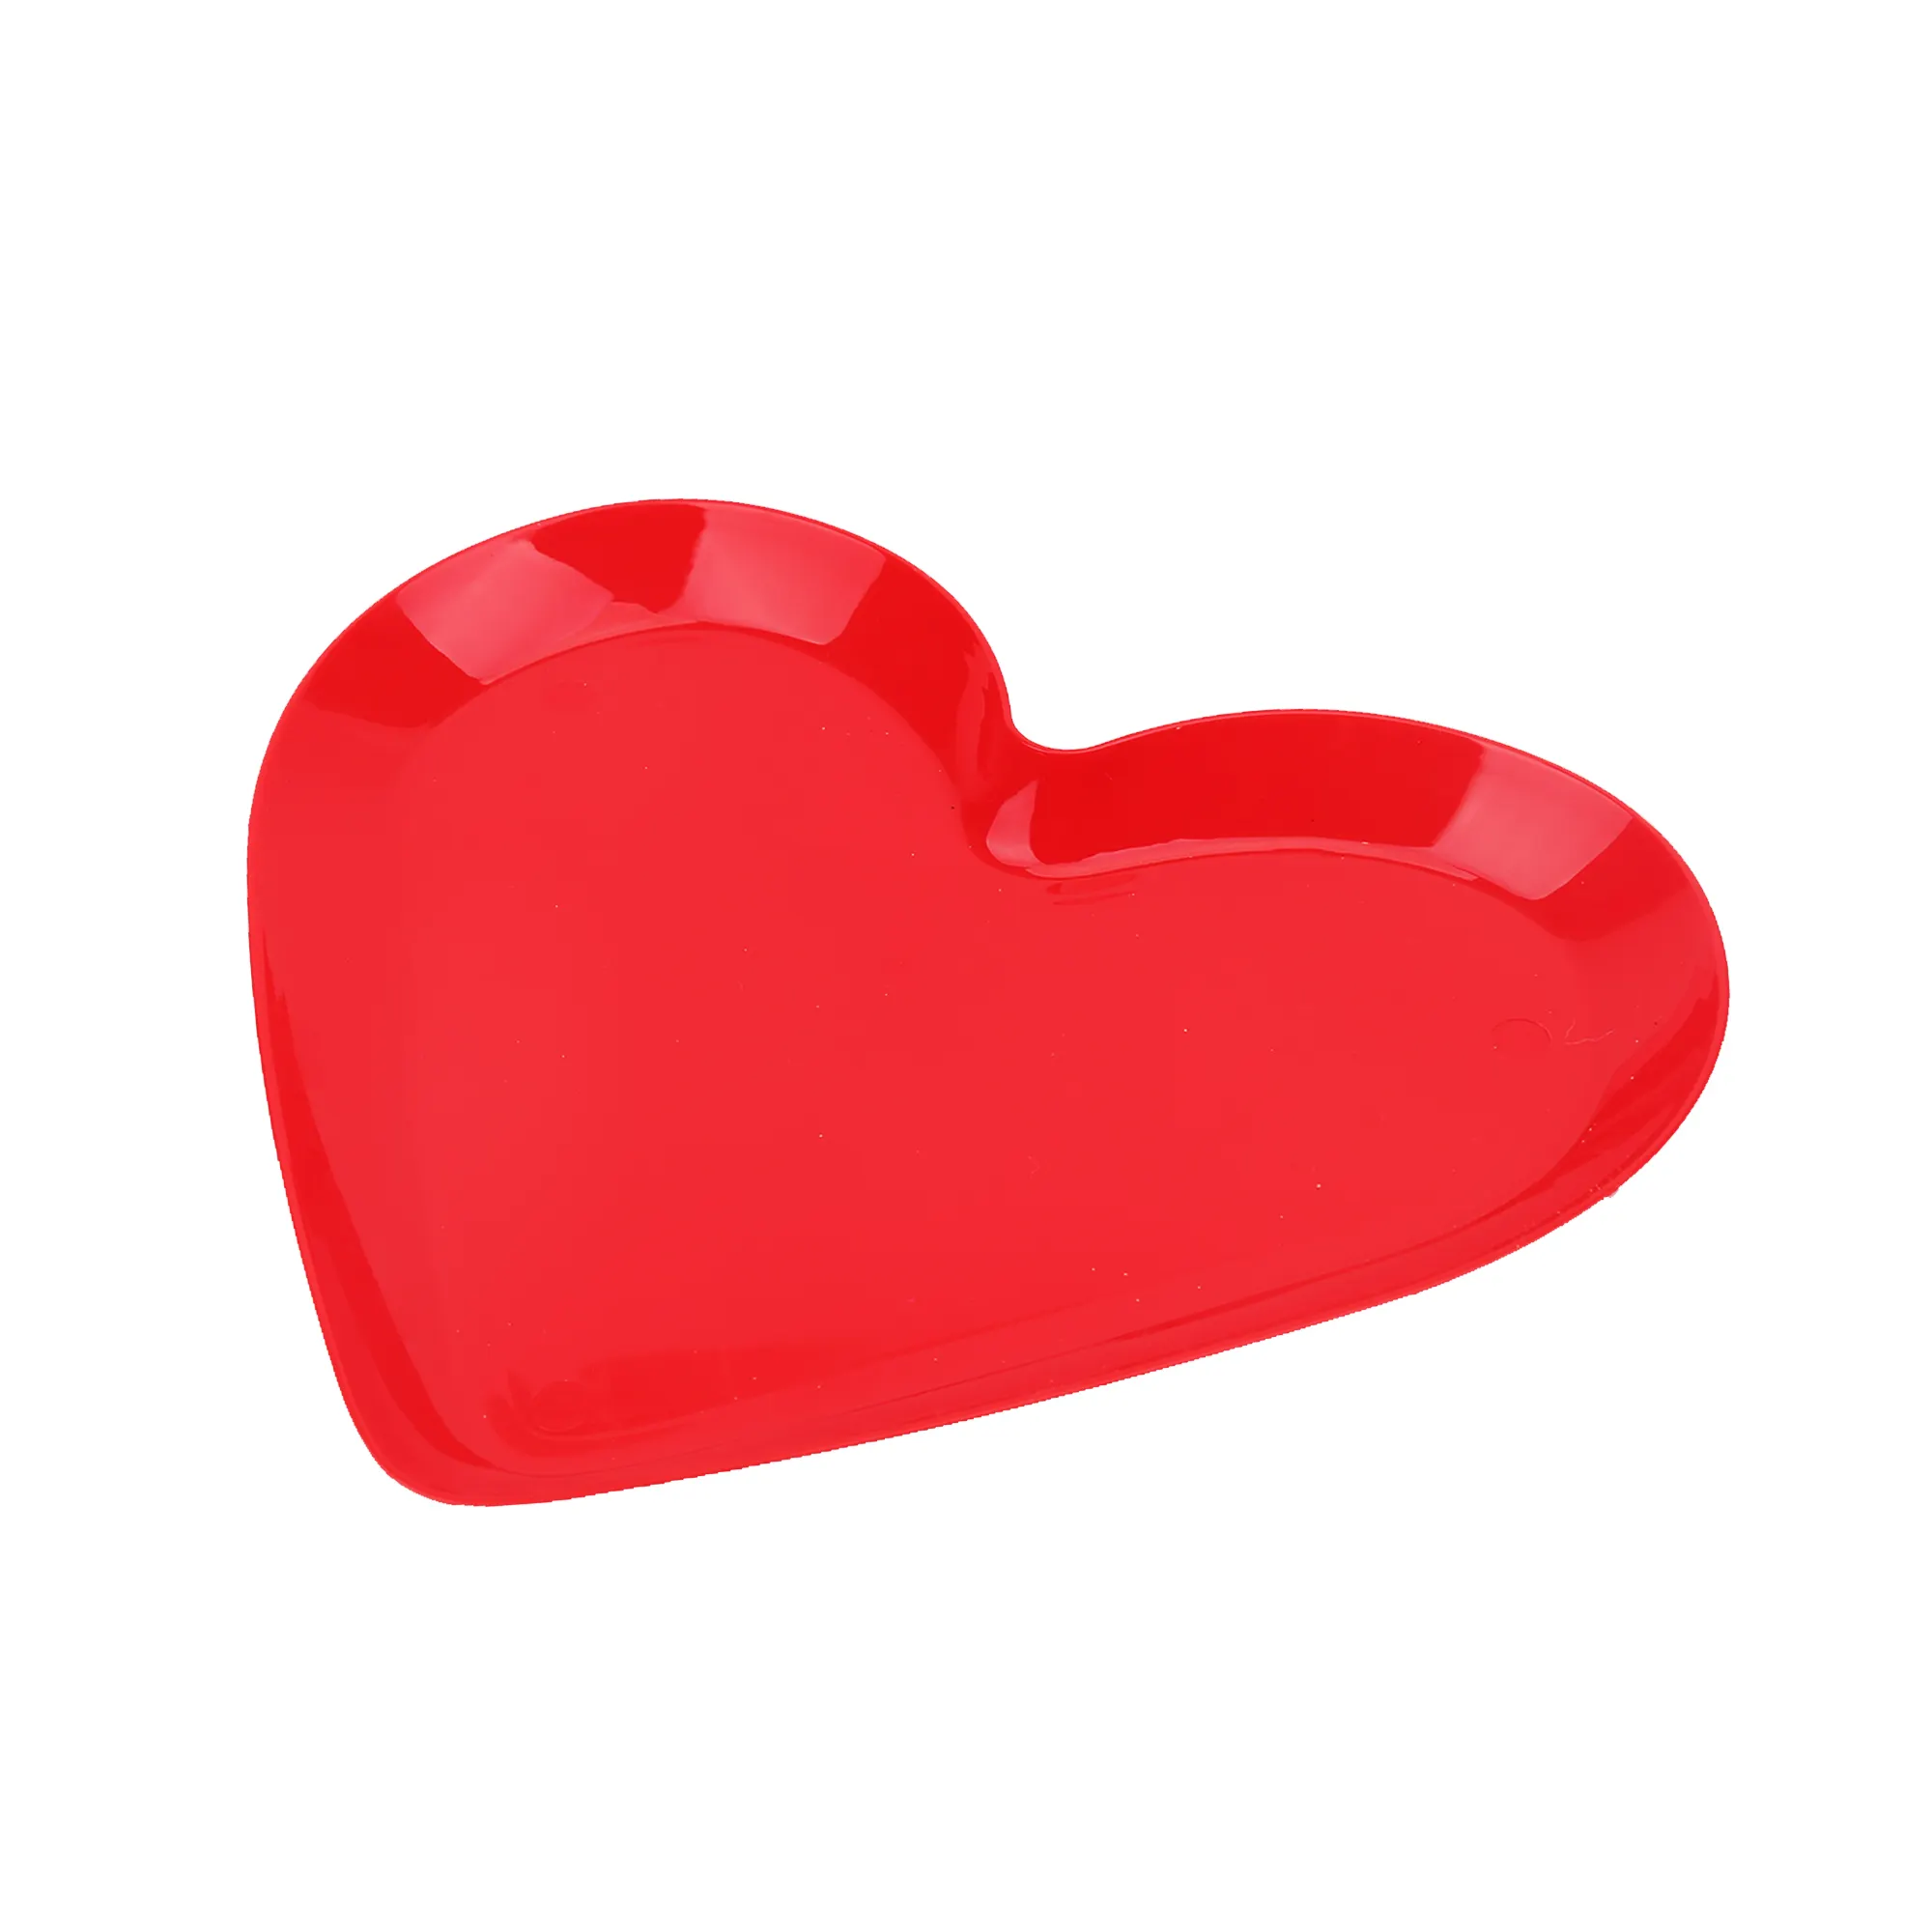 Top seller Dinnerware plastic plates Valentine day New Heart Shaped Eco-friendly red heart plates